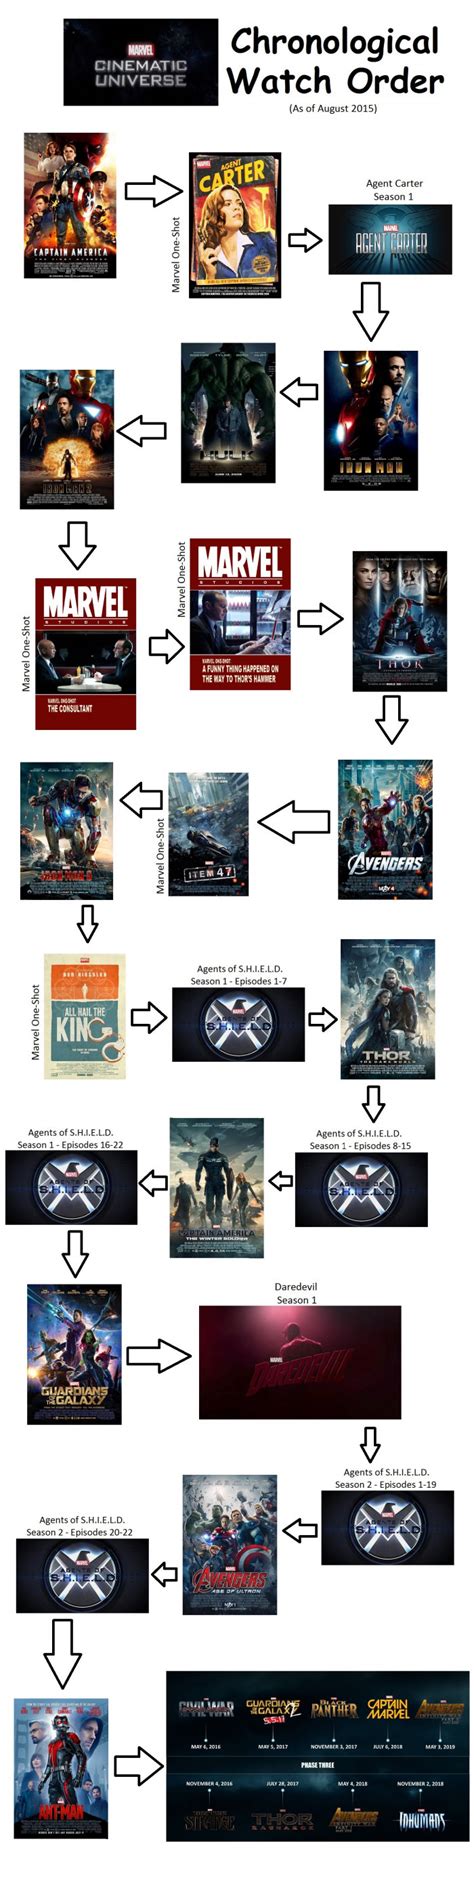 How To Watch The Marvel Cinematic Universe In Chronological Order